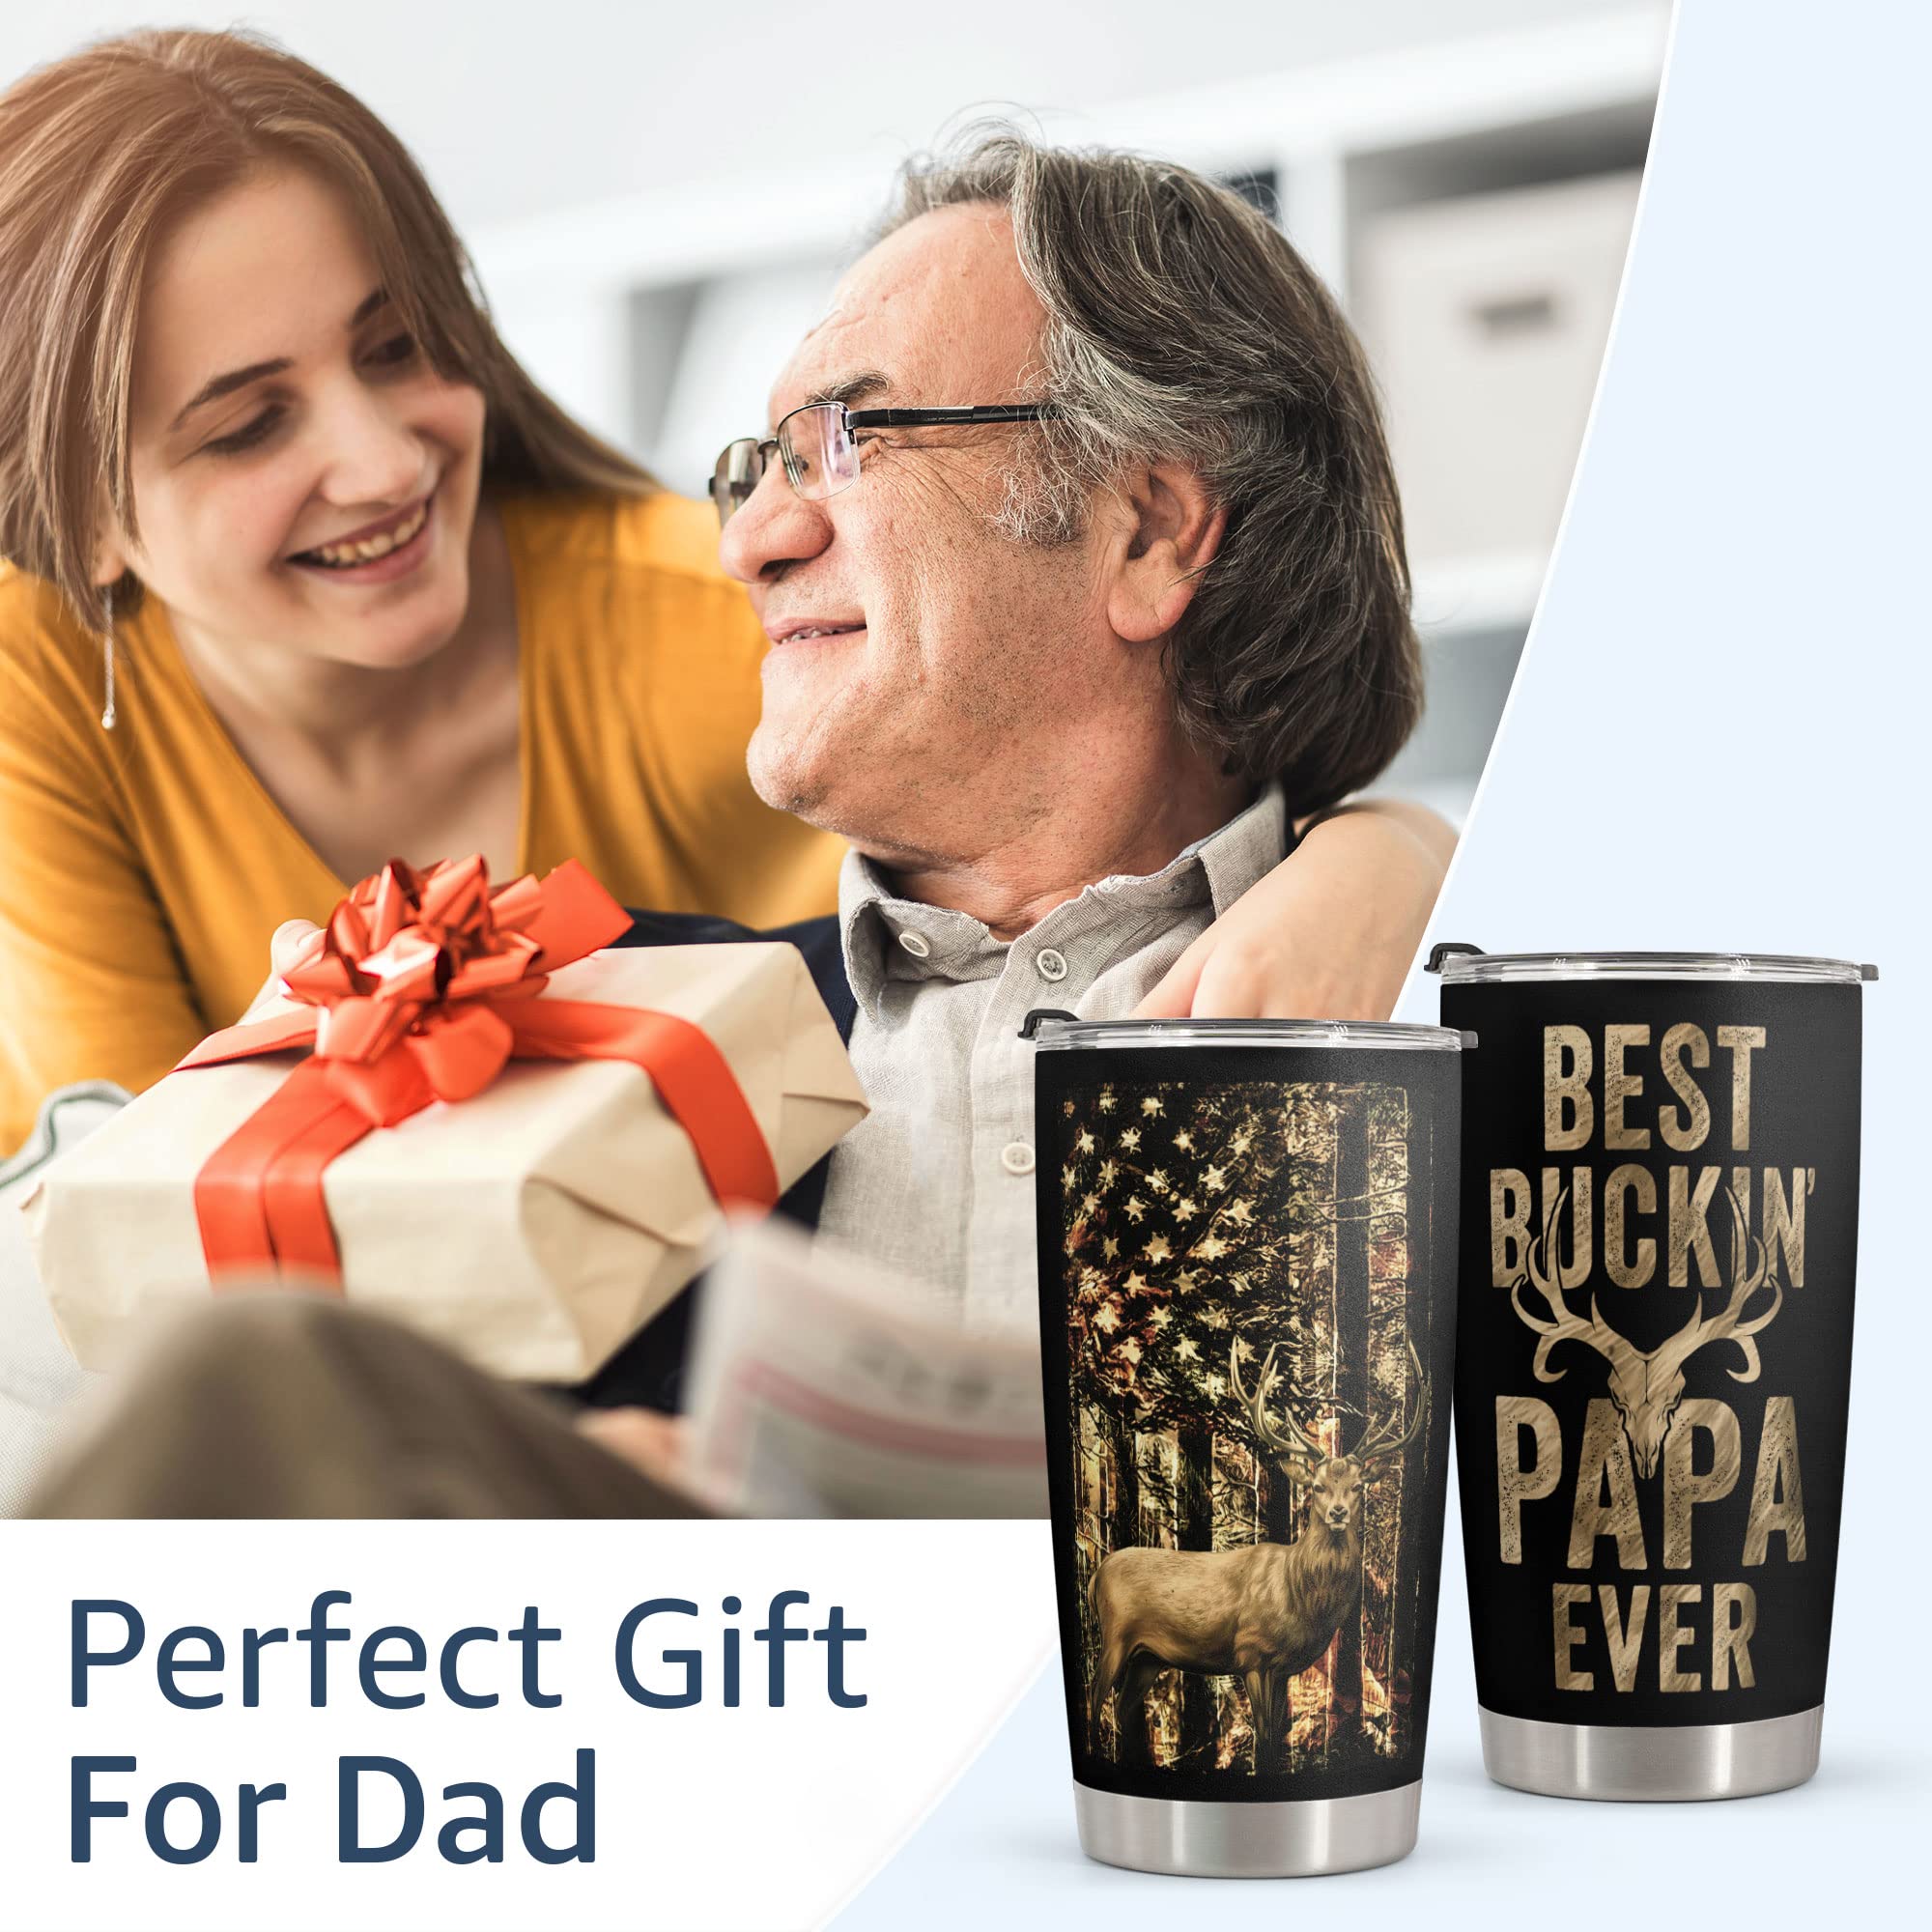 Macorner Hunting Gifts for Men - Stainless Steel Tumbler 20oz for Father - Best Buckin Papa - Birthday Gifts for Men Dad Papa Husband - Christmas Gifts for Dad from Daughter Son - Gifts for Hunters